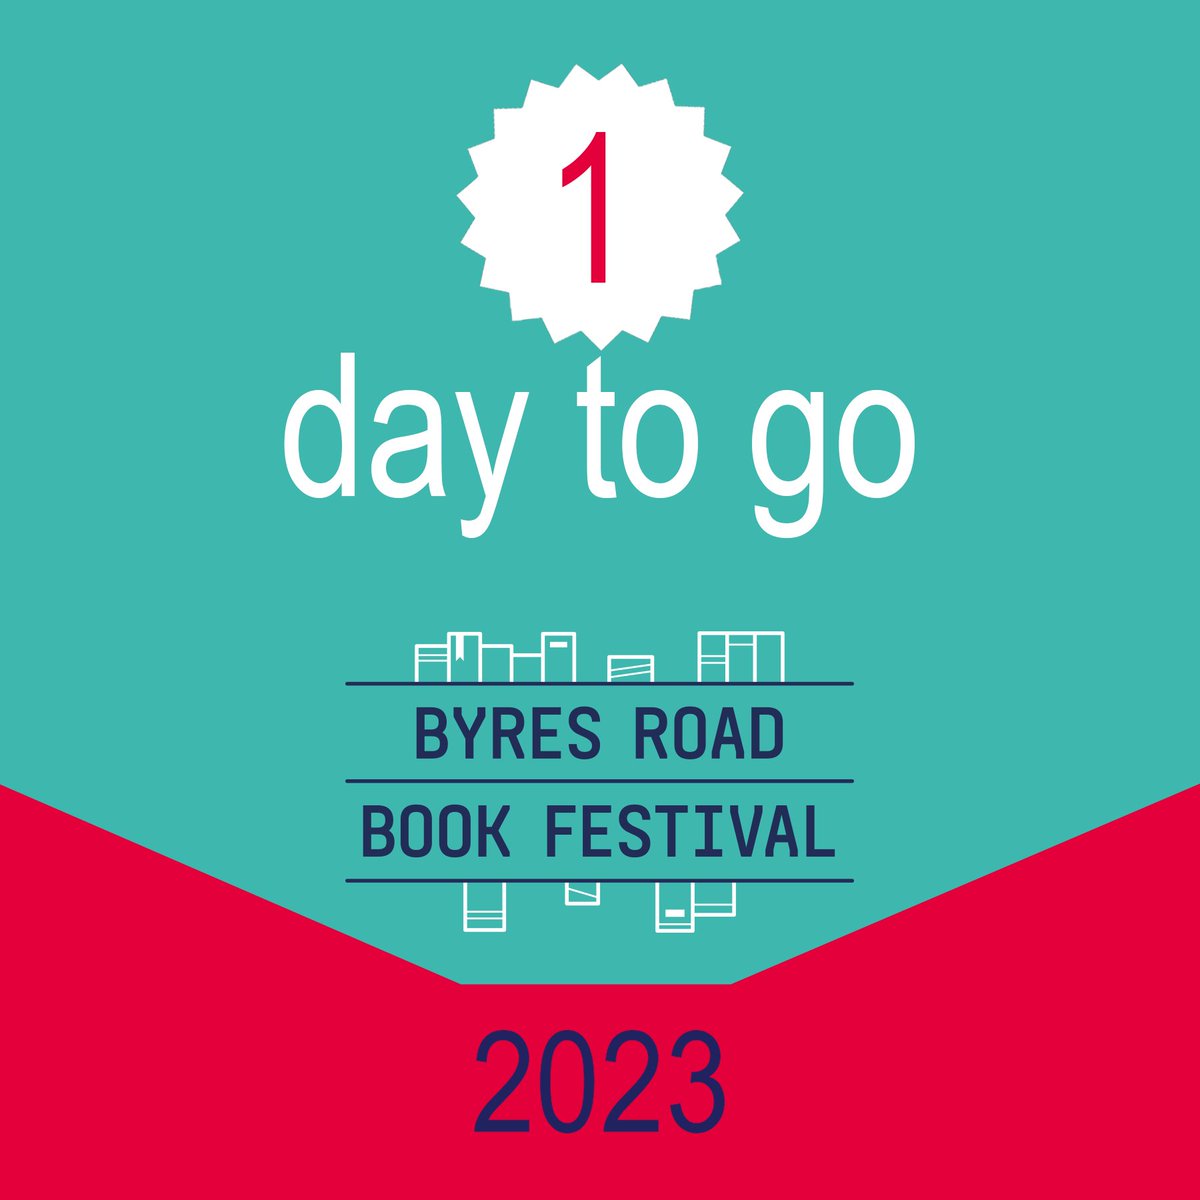 🎈
1 day to go!!

Secure your last minute free tickets by following the link in our bio 📚

#byresroadbookfest